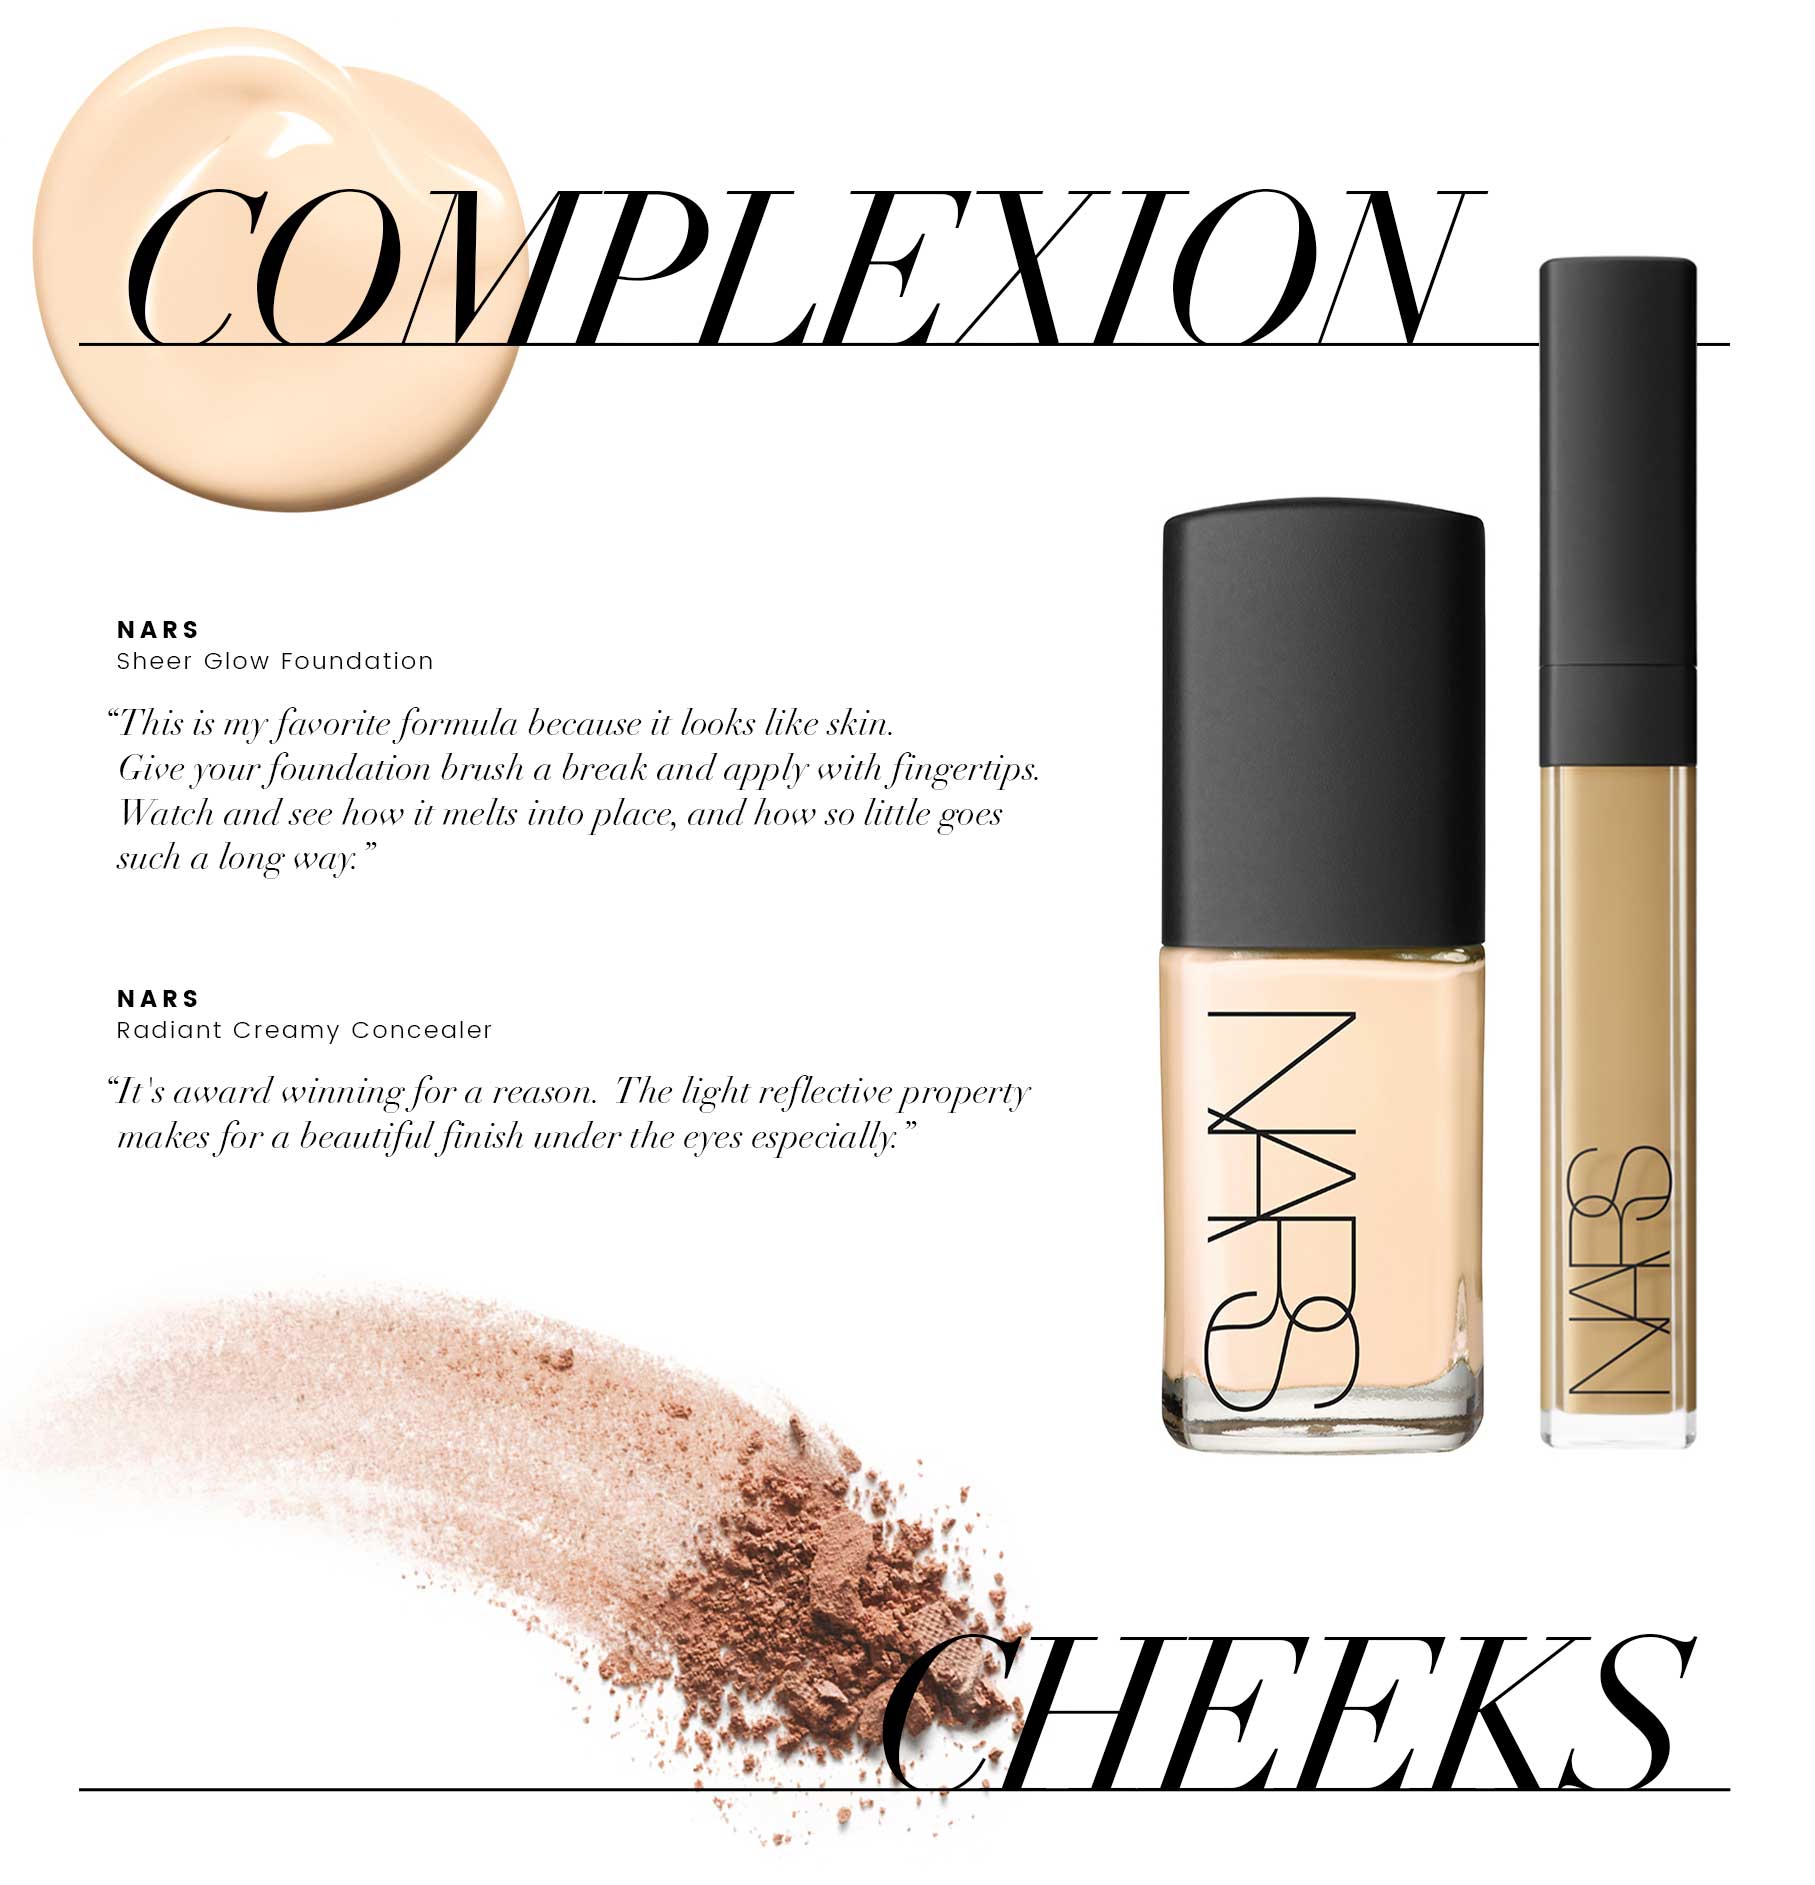 beauty tips - complexion